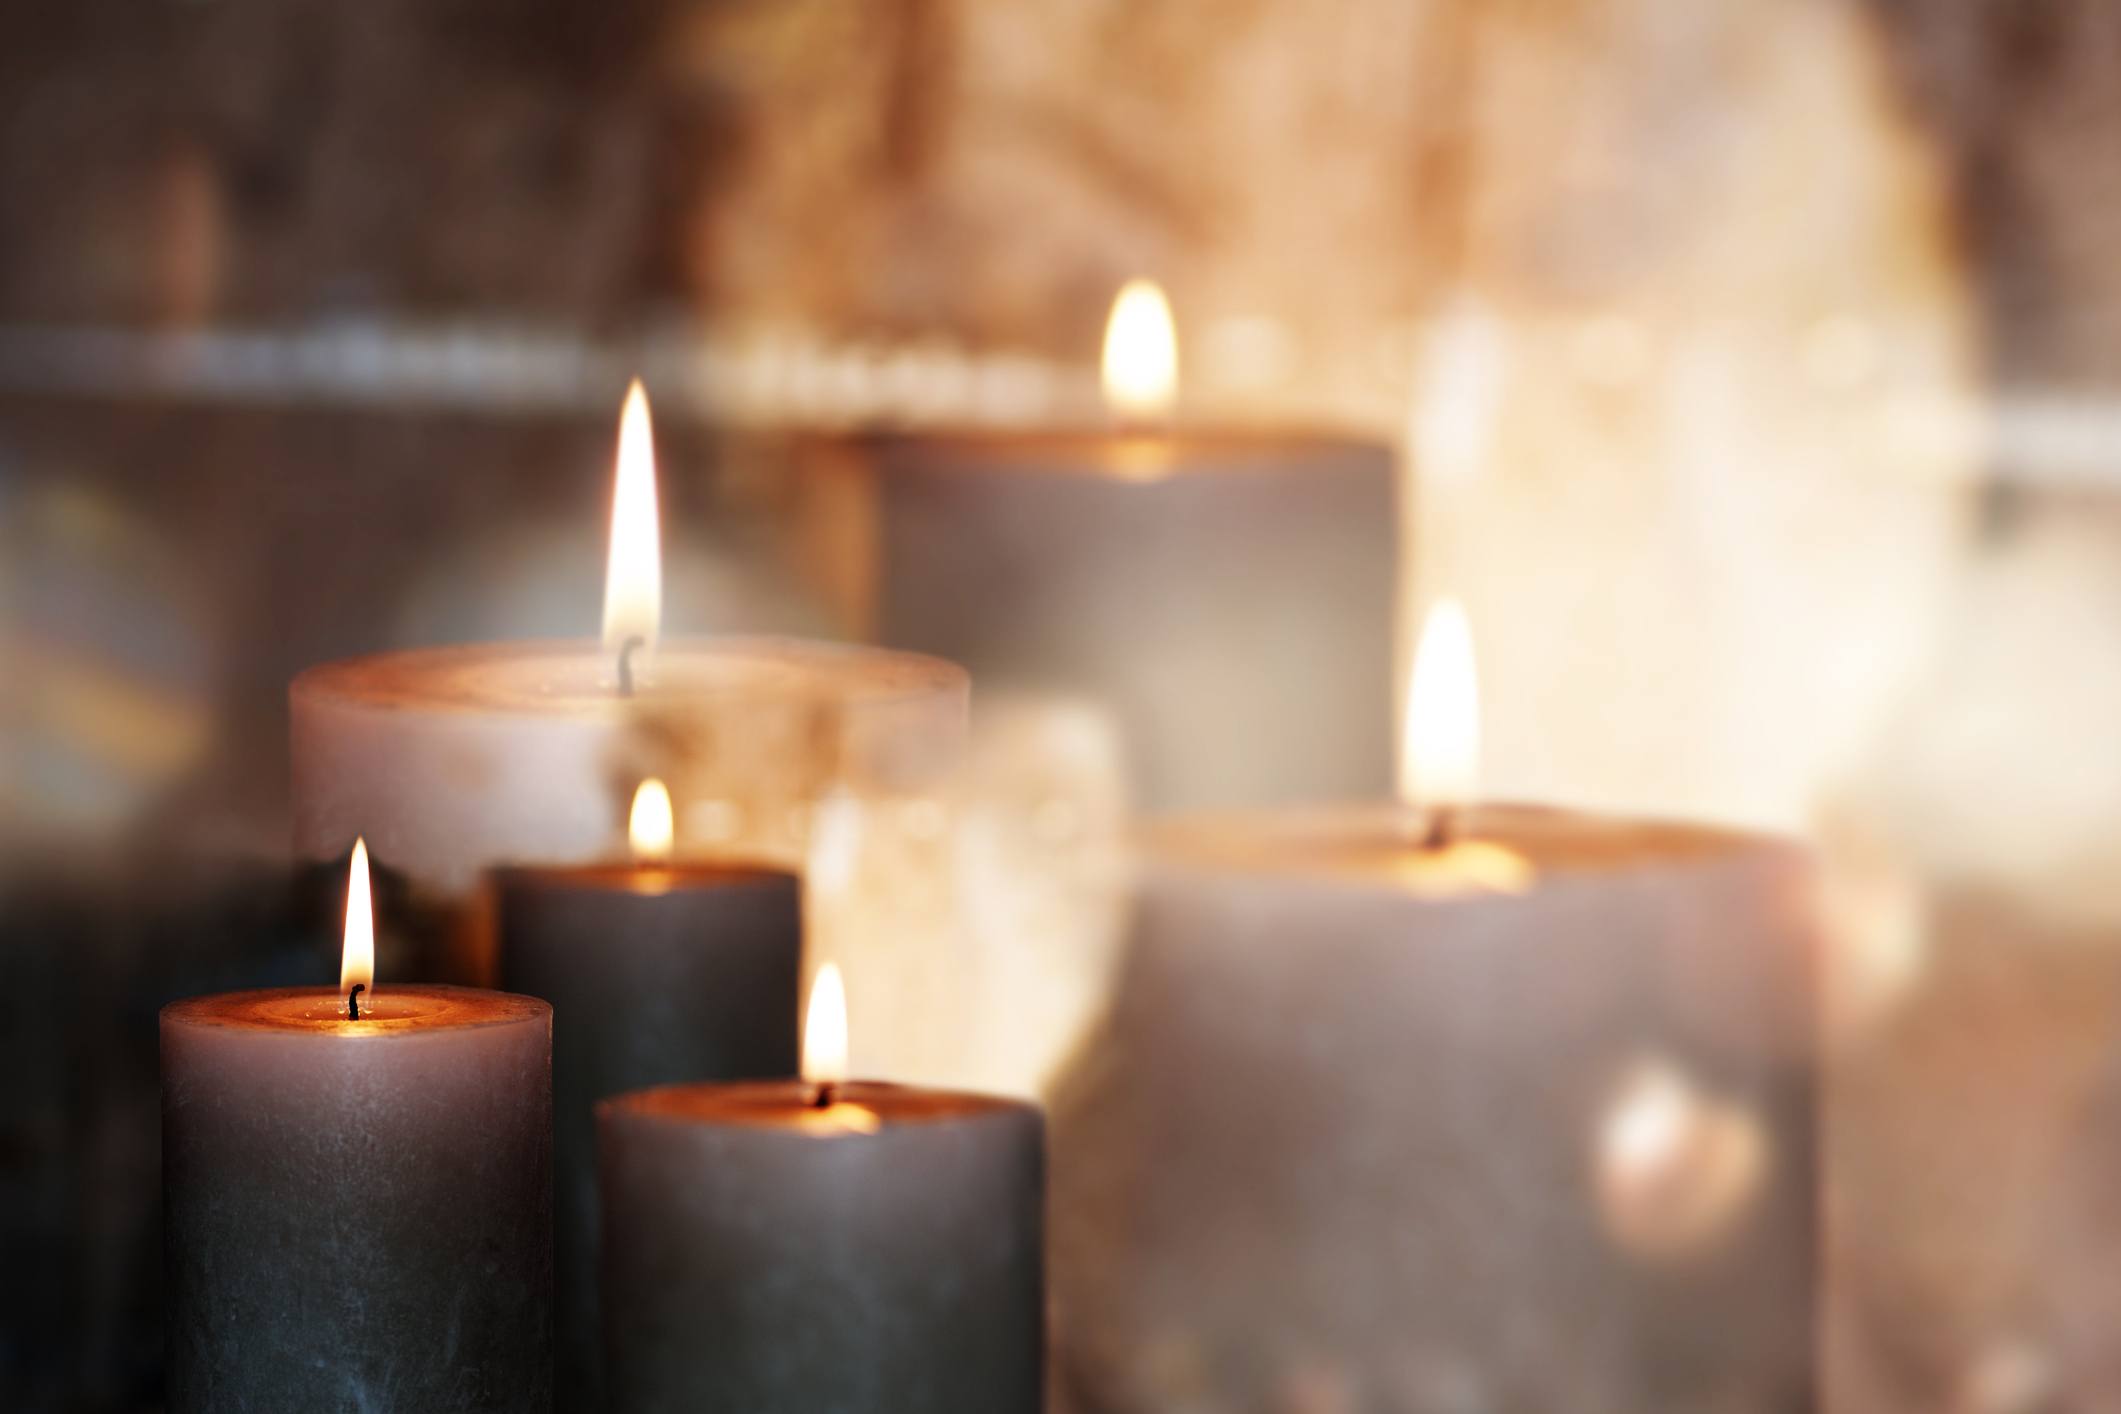 Love Burning Candles? Here's What You Need to Do to Make Them Last